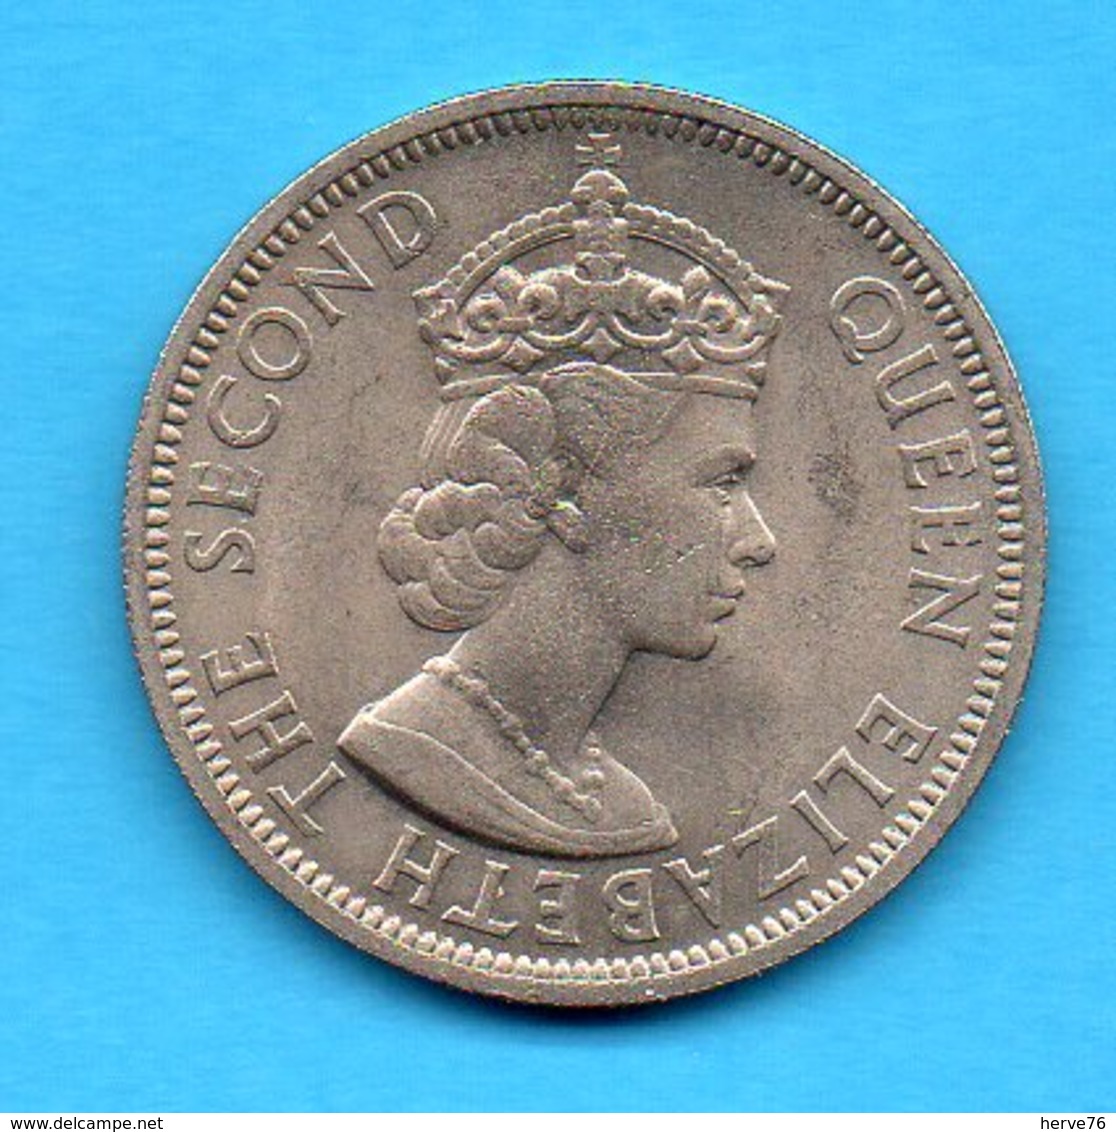 MALAYA AND BRITISH BORNEO - Pièce 50 CENTS - 1961 -  Queen Elisabeth The Second - Malaysia